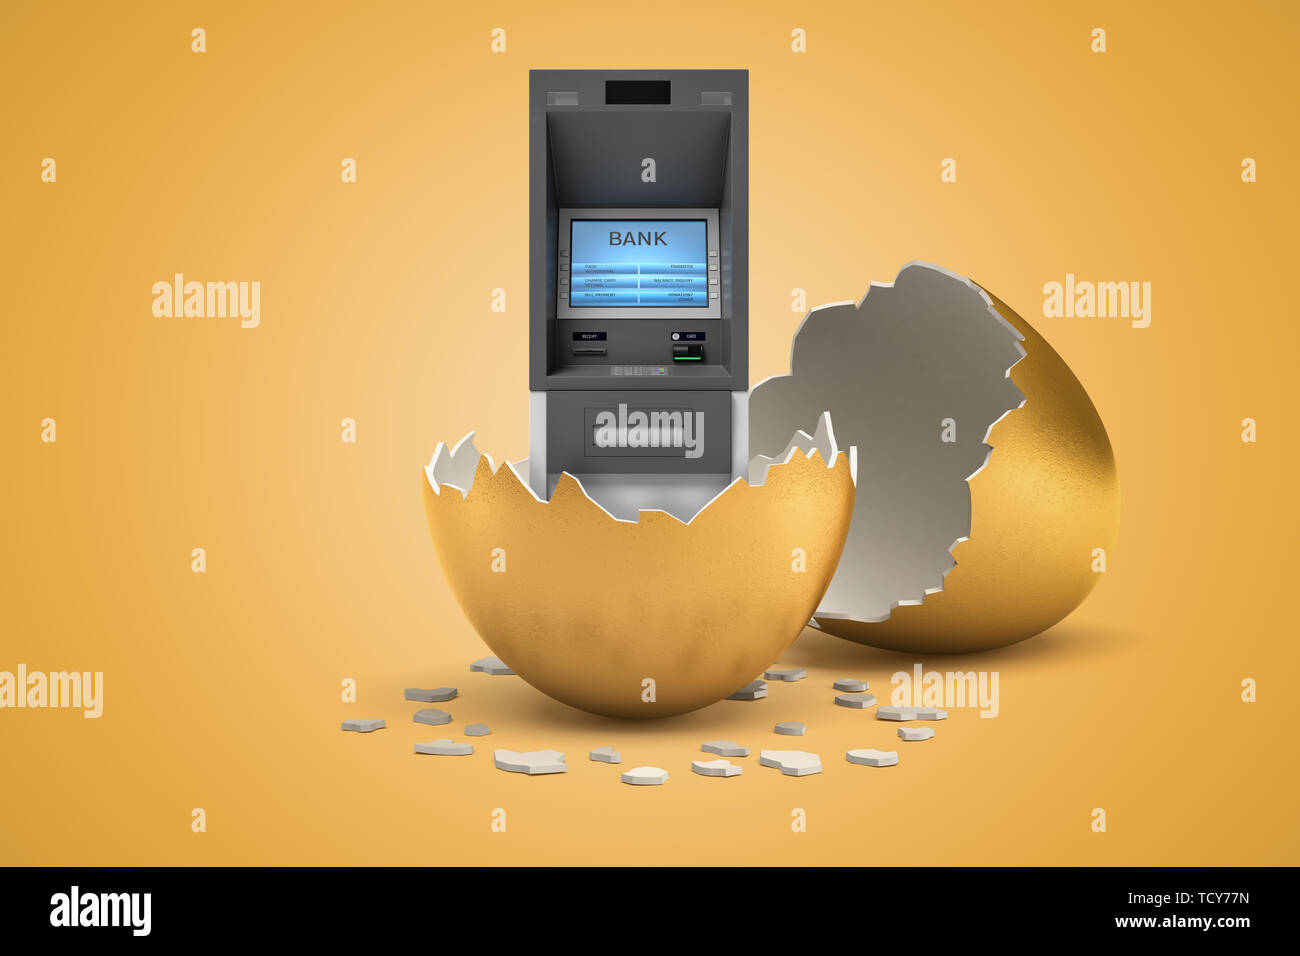 3d rendering of ATM that just hatched out from golden egg. Stock Photo